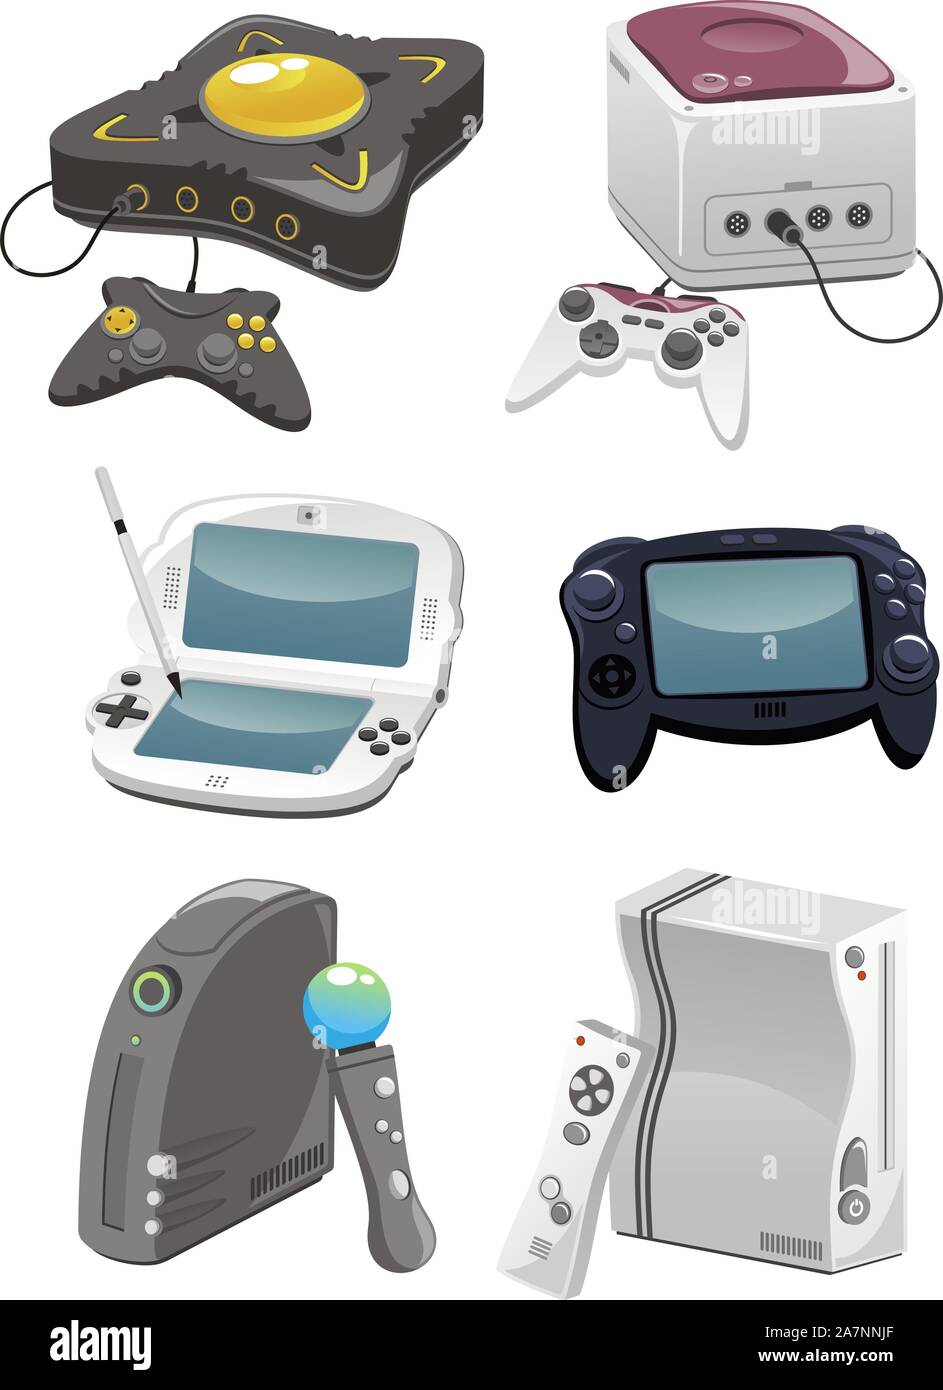 video game consoles illustrations close to modern consoles, some invented. Stock Vector